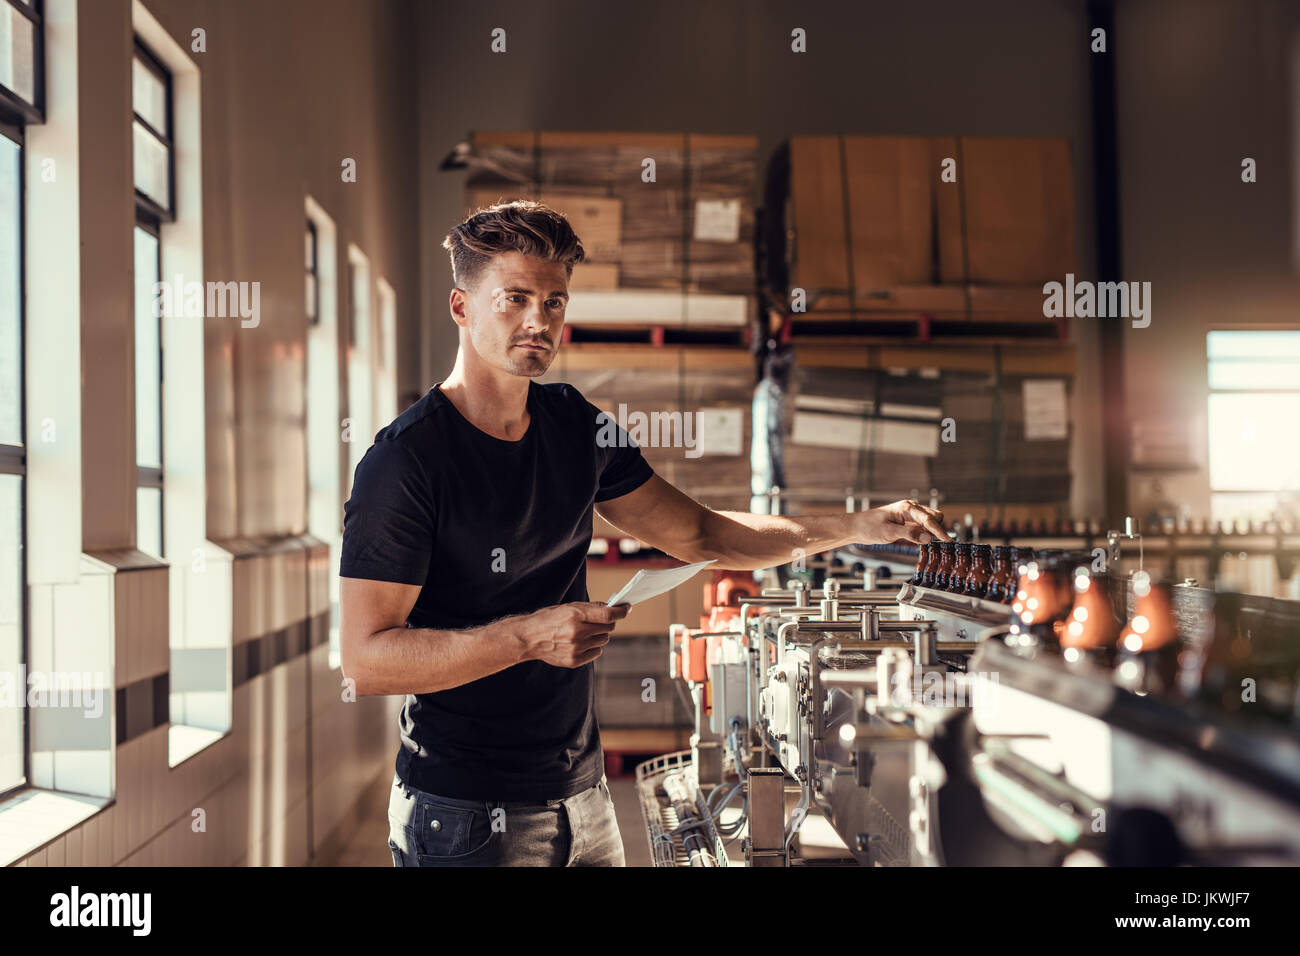 Brewer examining the beer production in brewery plant. Young man standing at the beer bottling machine in factory. Stock Photo